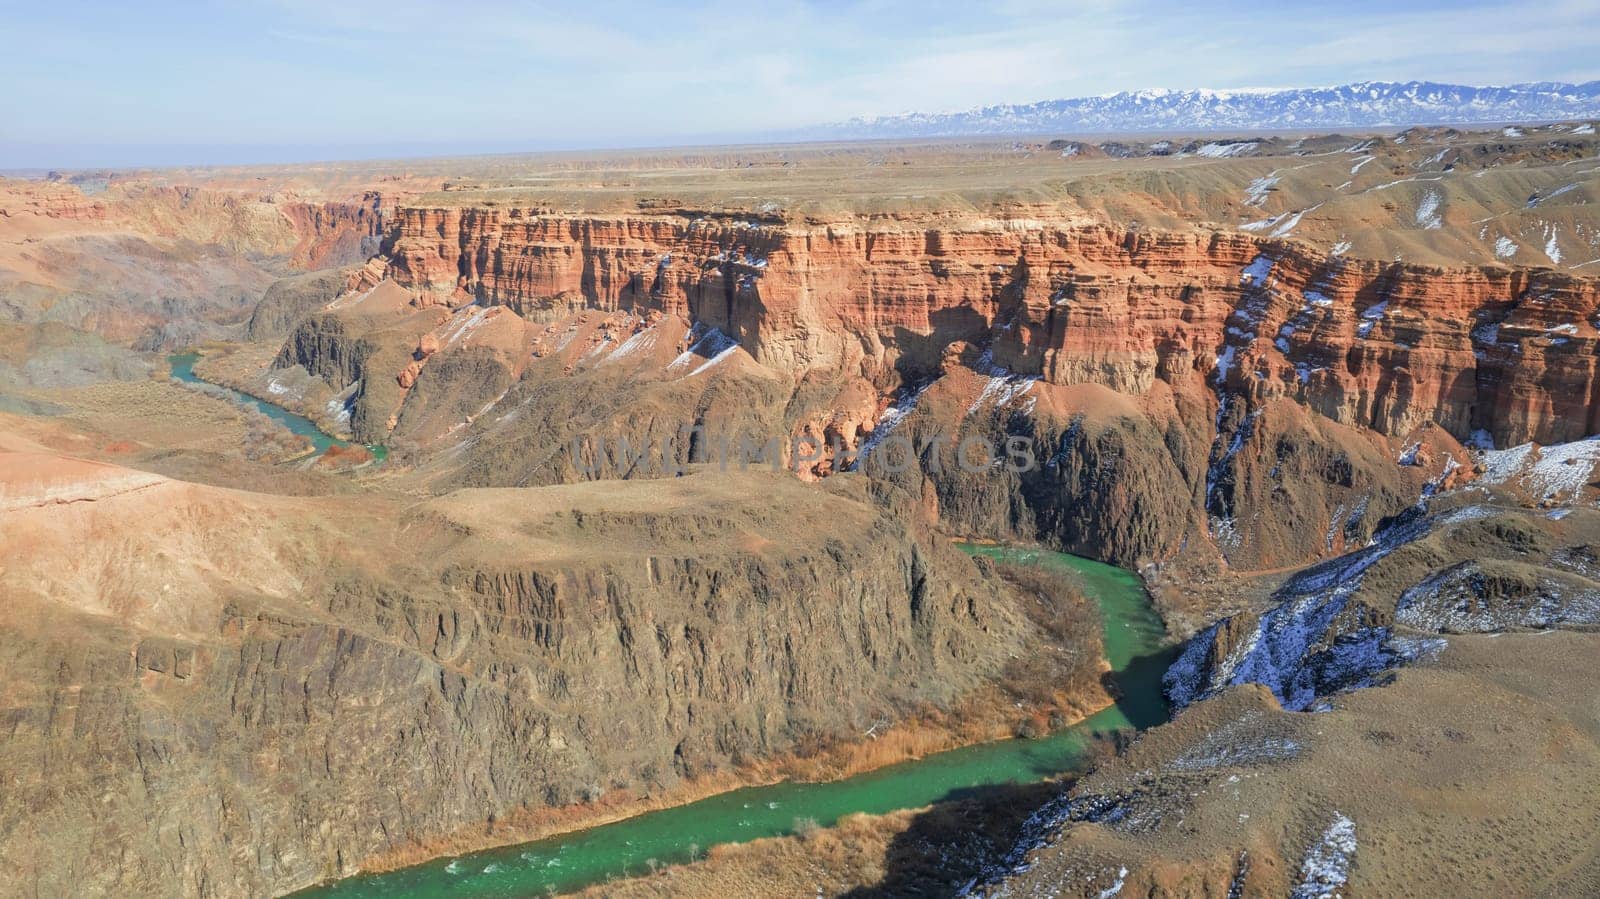 A long river with green water in the Charyn Canyon. There is white snow in places. Bushes and trees grow. The river runs through a canyon among rocks and cliffs. Mountains are visible. Drone view